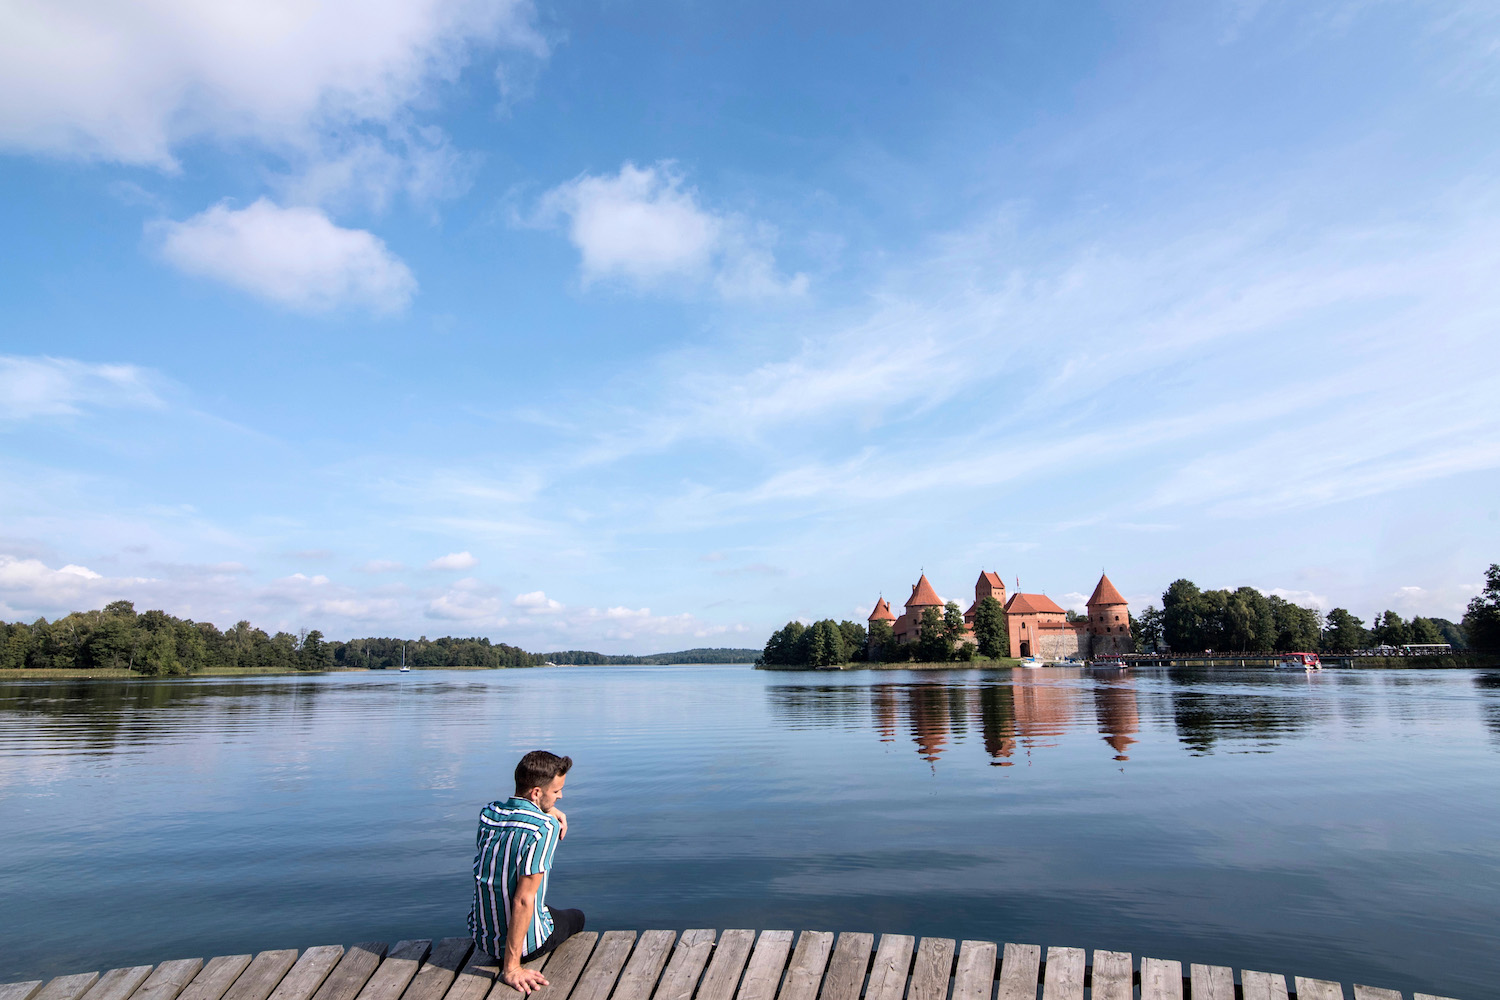 30 Pictures That Will Make You Want to Visit the Baltics